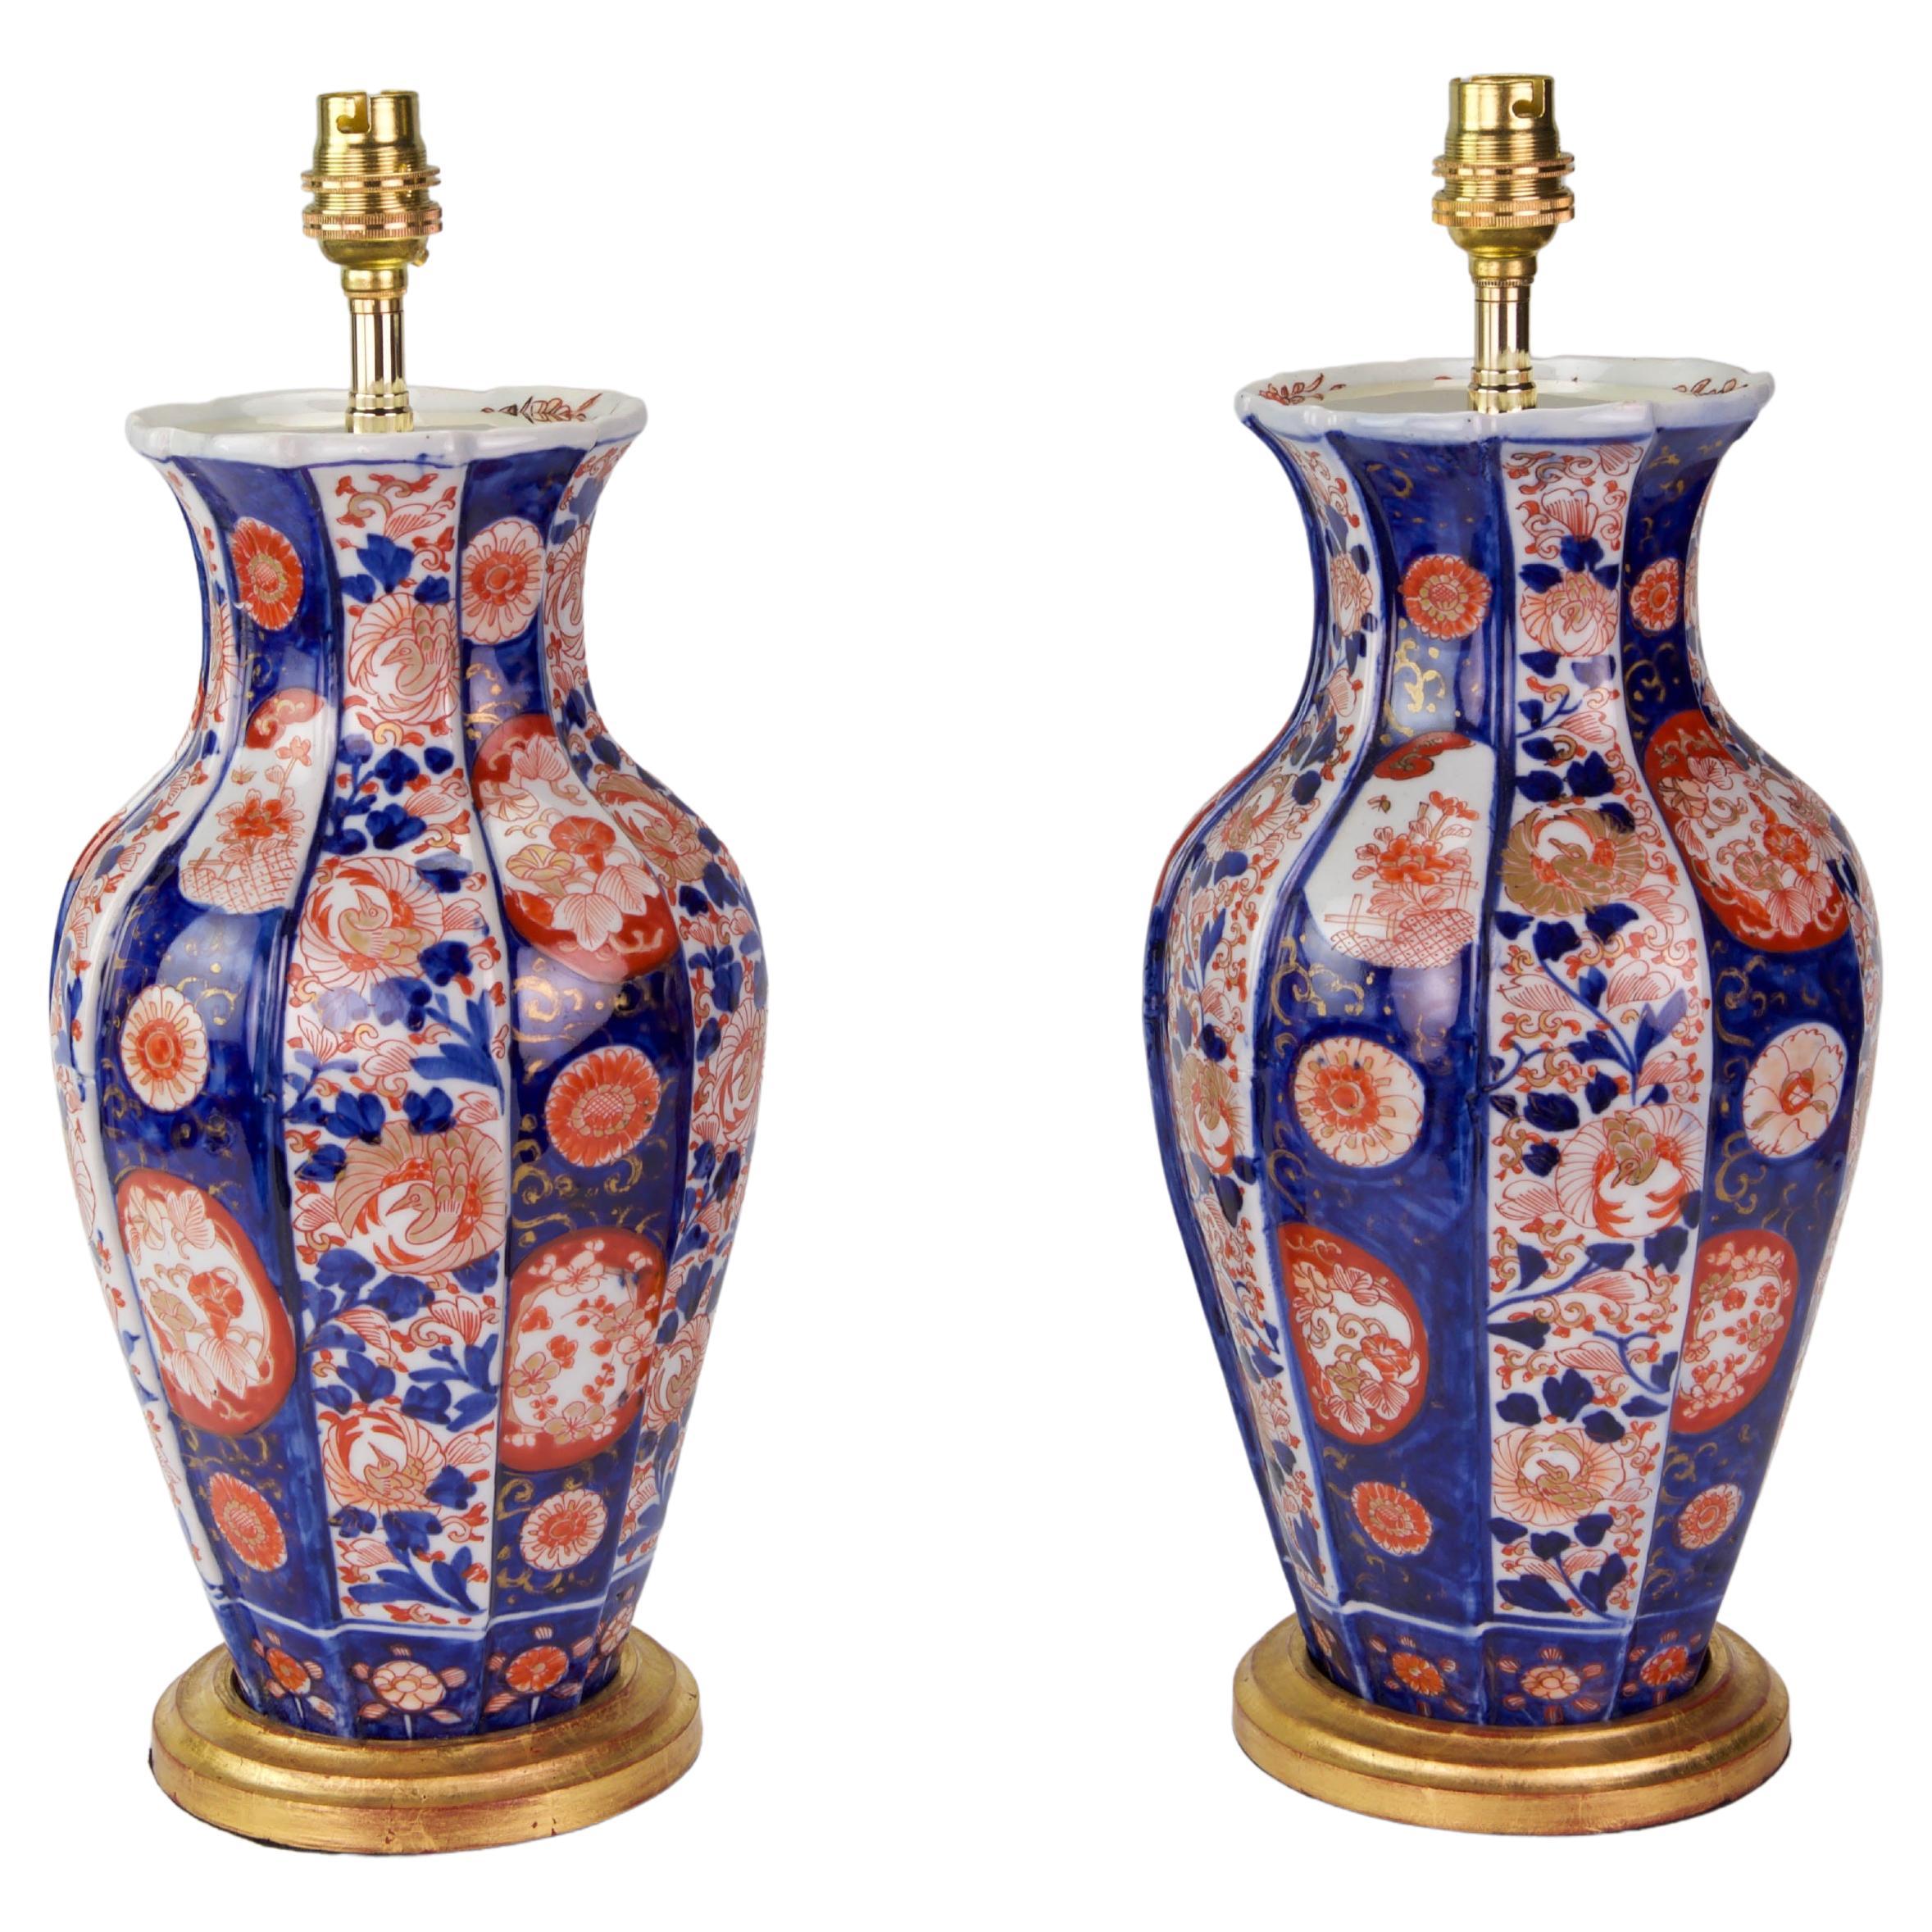 Pair of 19th Century Small Imari Japanese Porcelain Antique Table Lamps